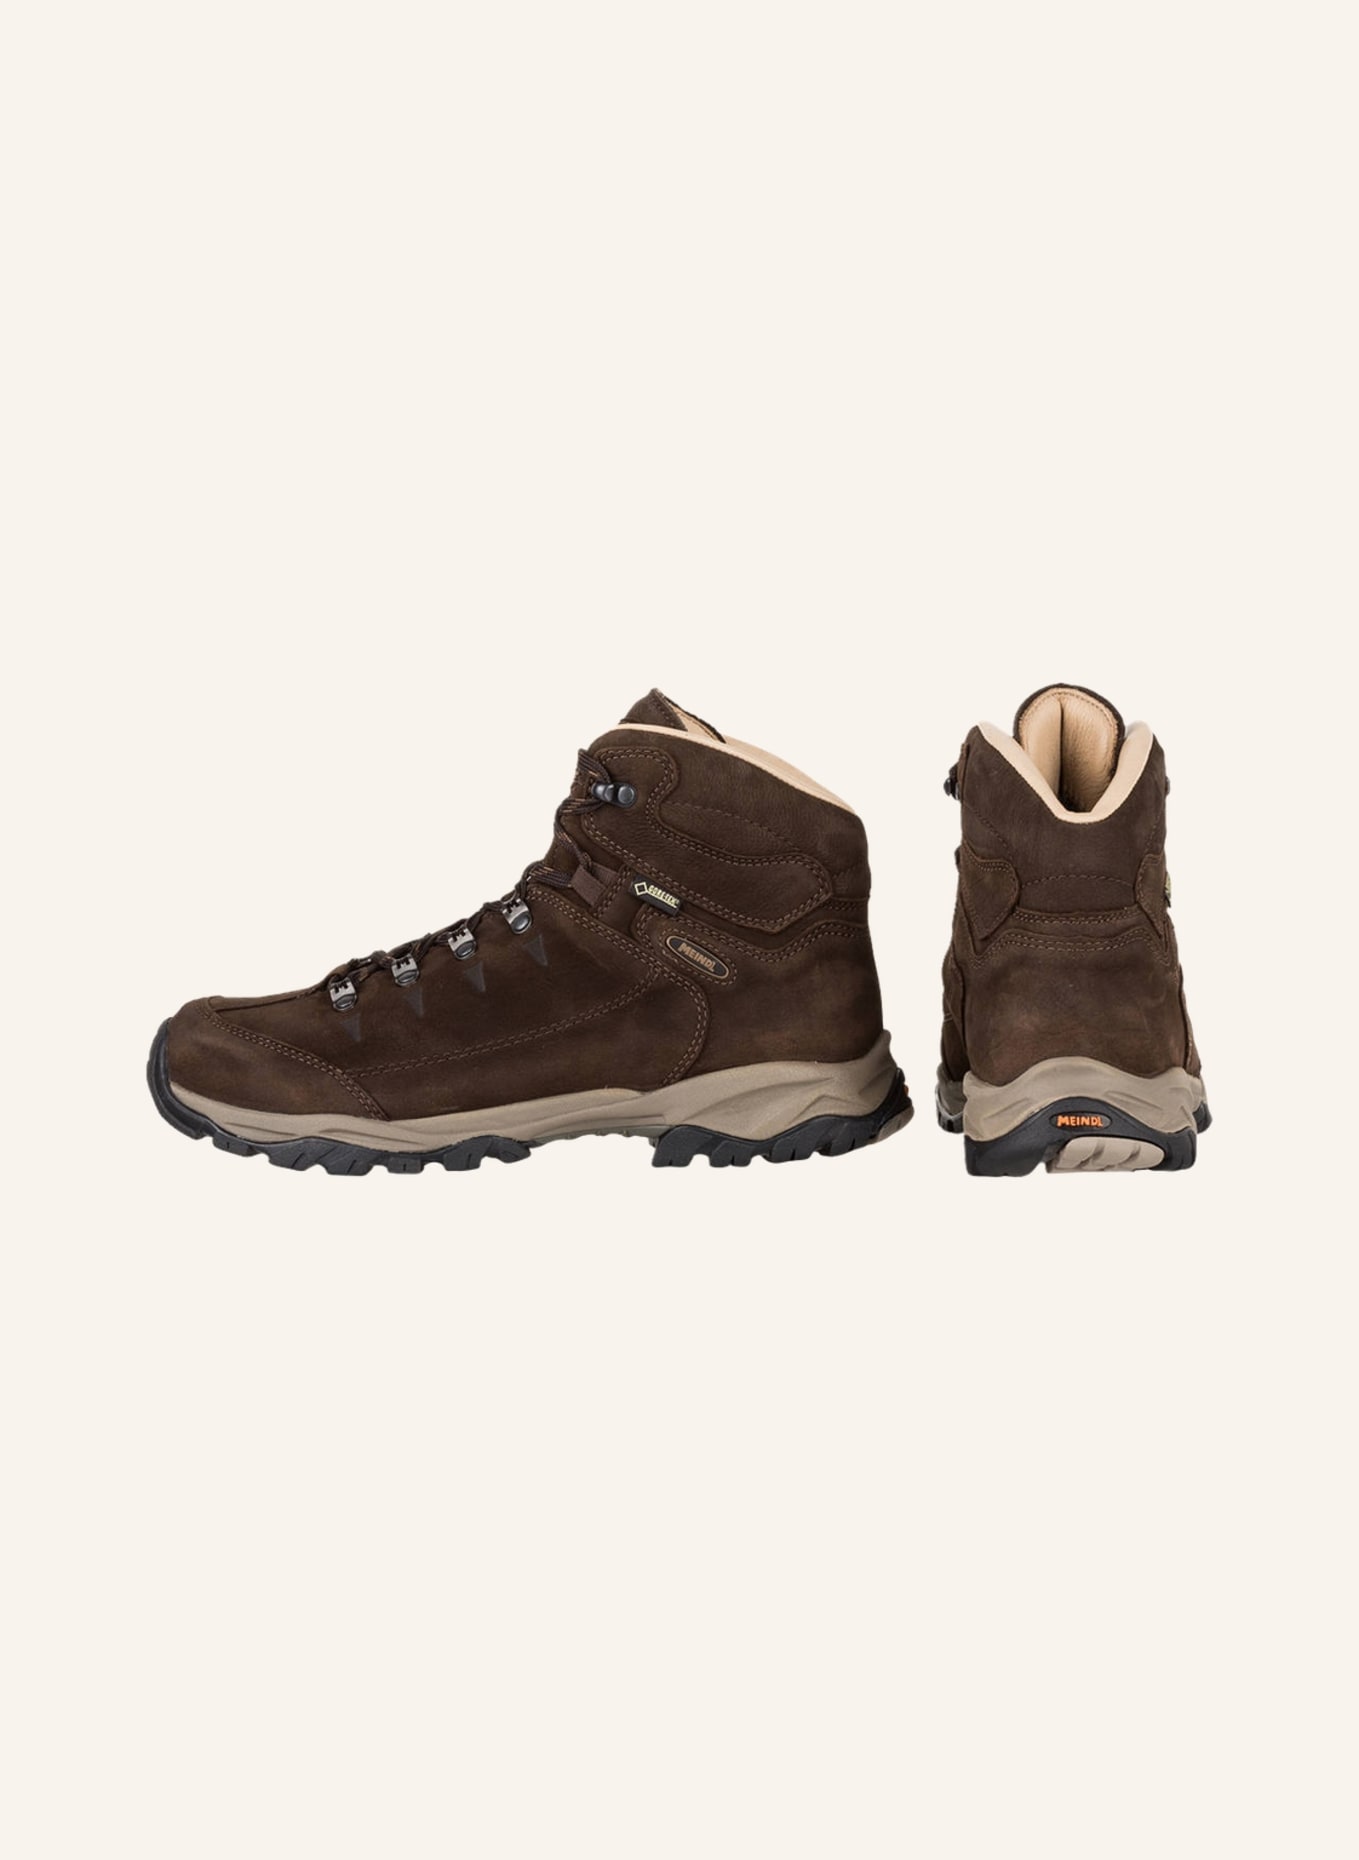 MEINDL Outdoor shoes OHIO 2 GTX, Color: BROWN (Image 4)